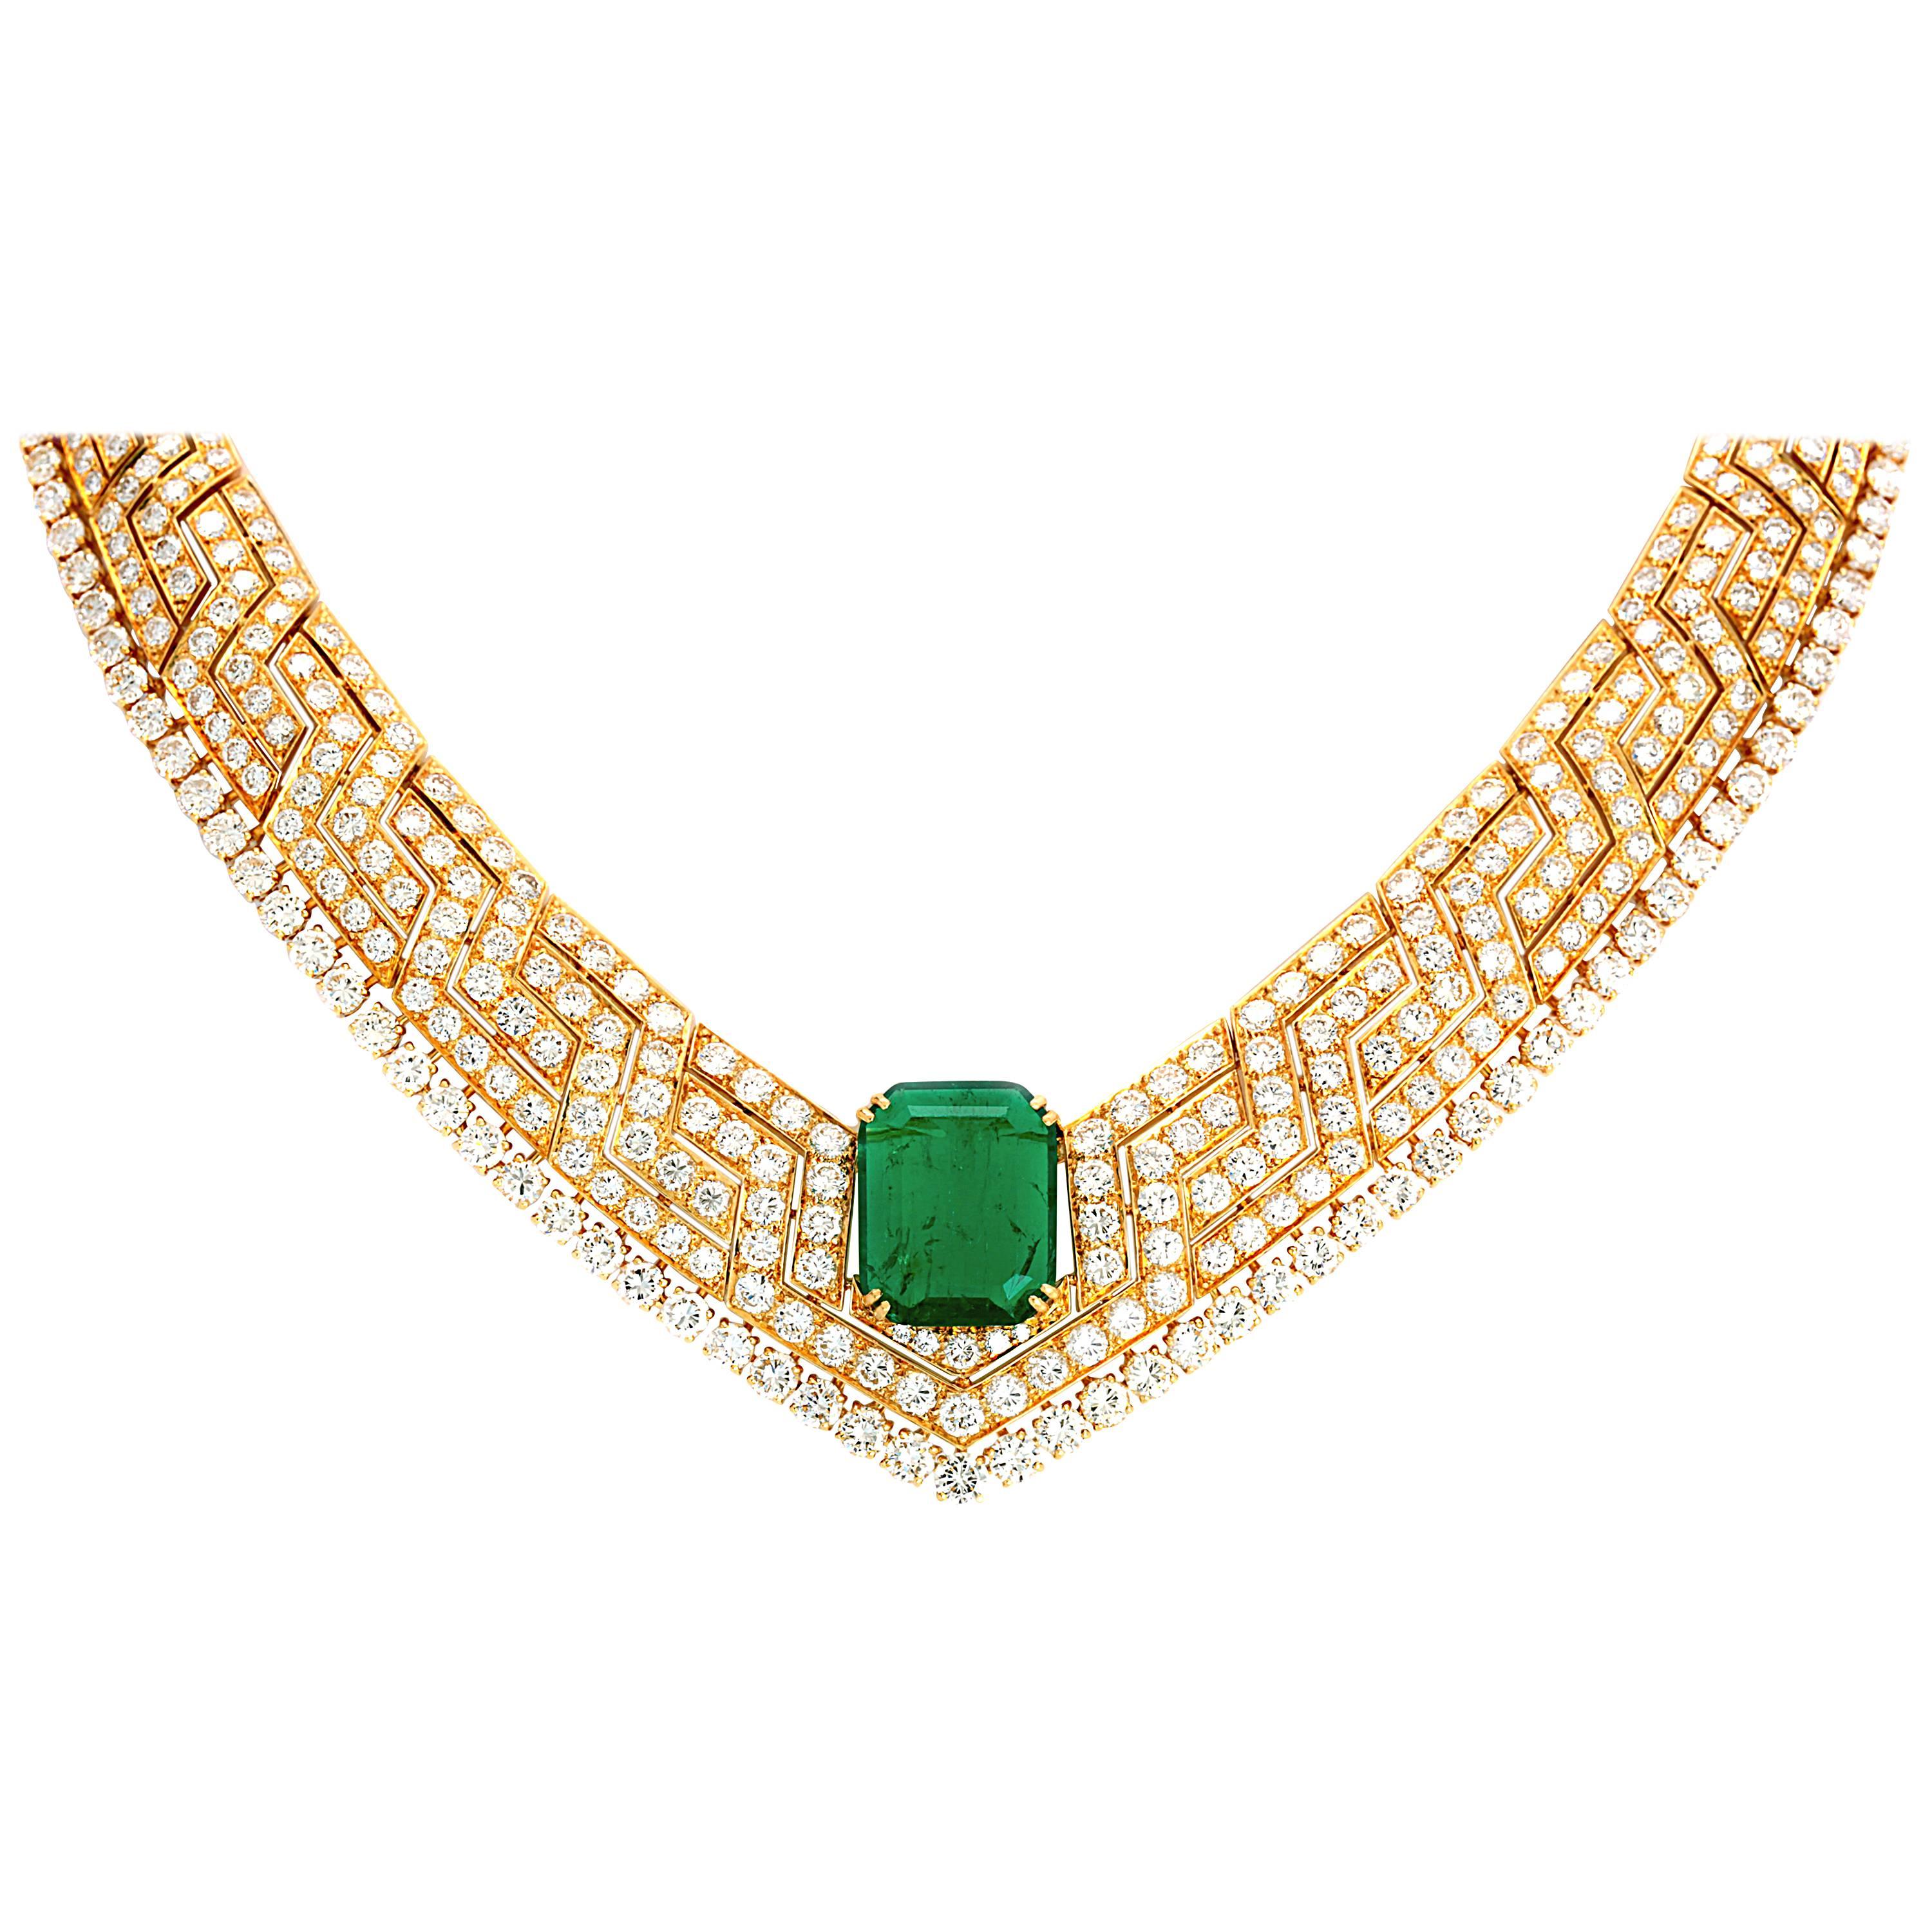 AGL Certified 9.23 Carat Colombian Emerald Necklace For Sale